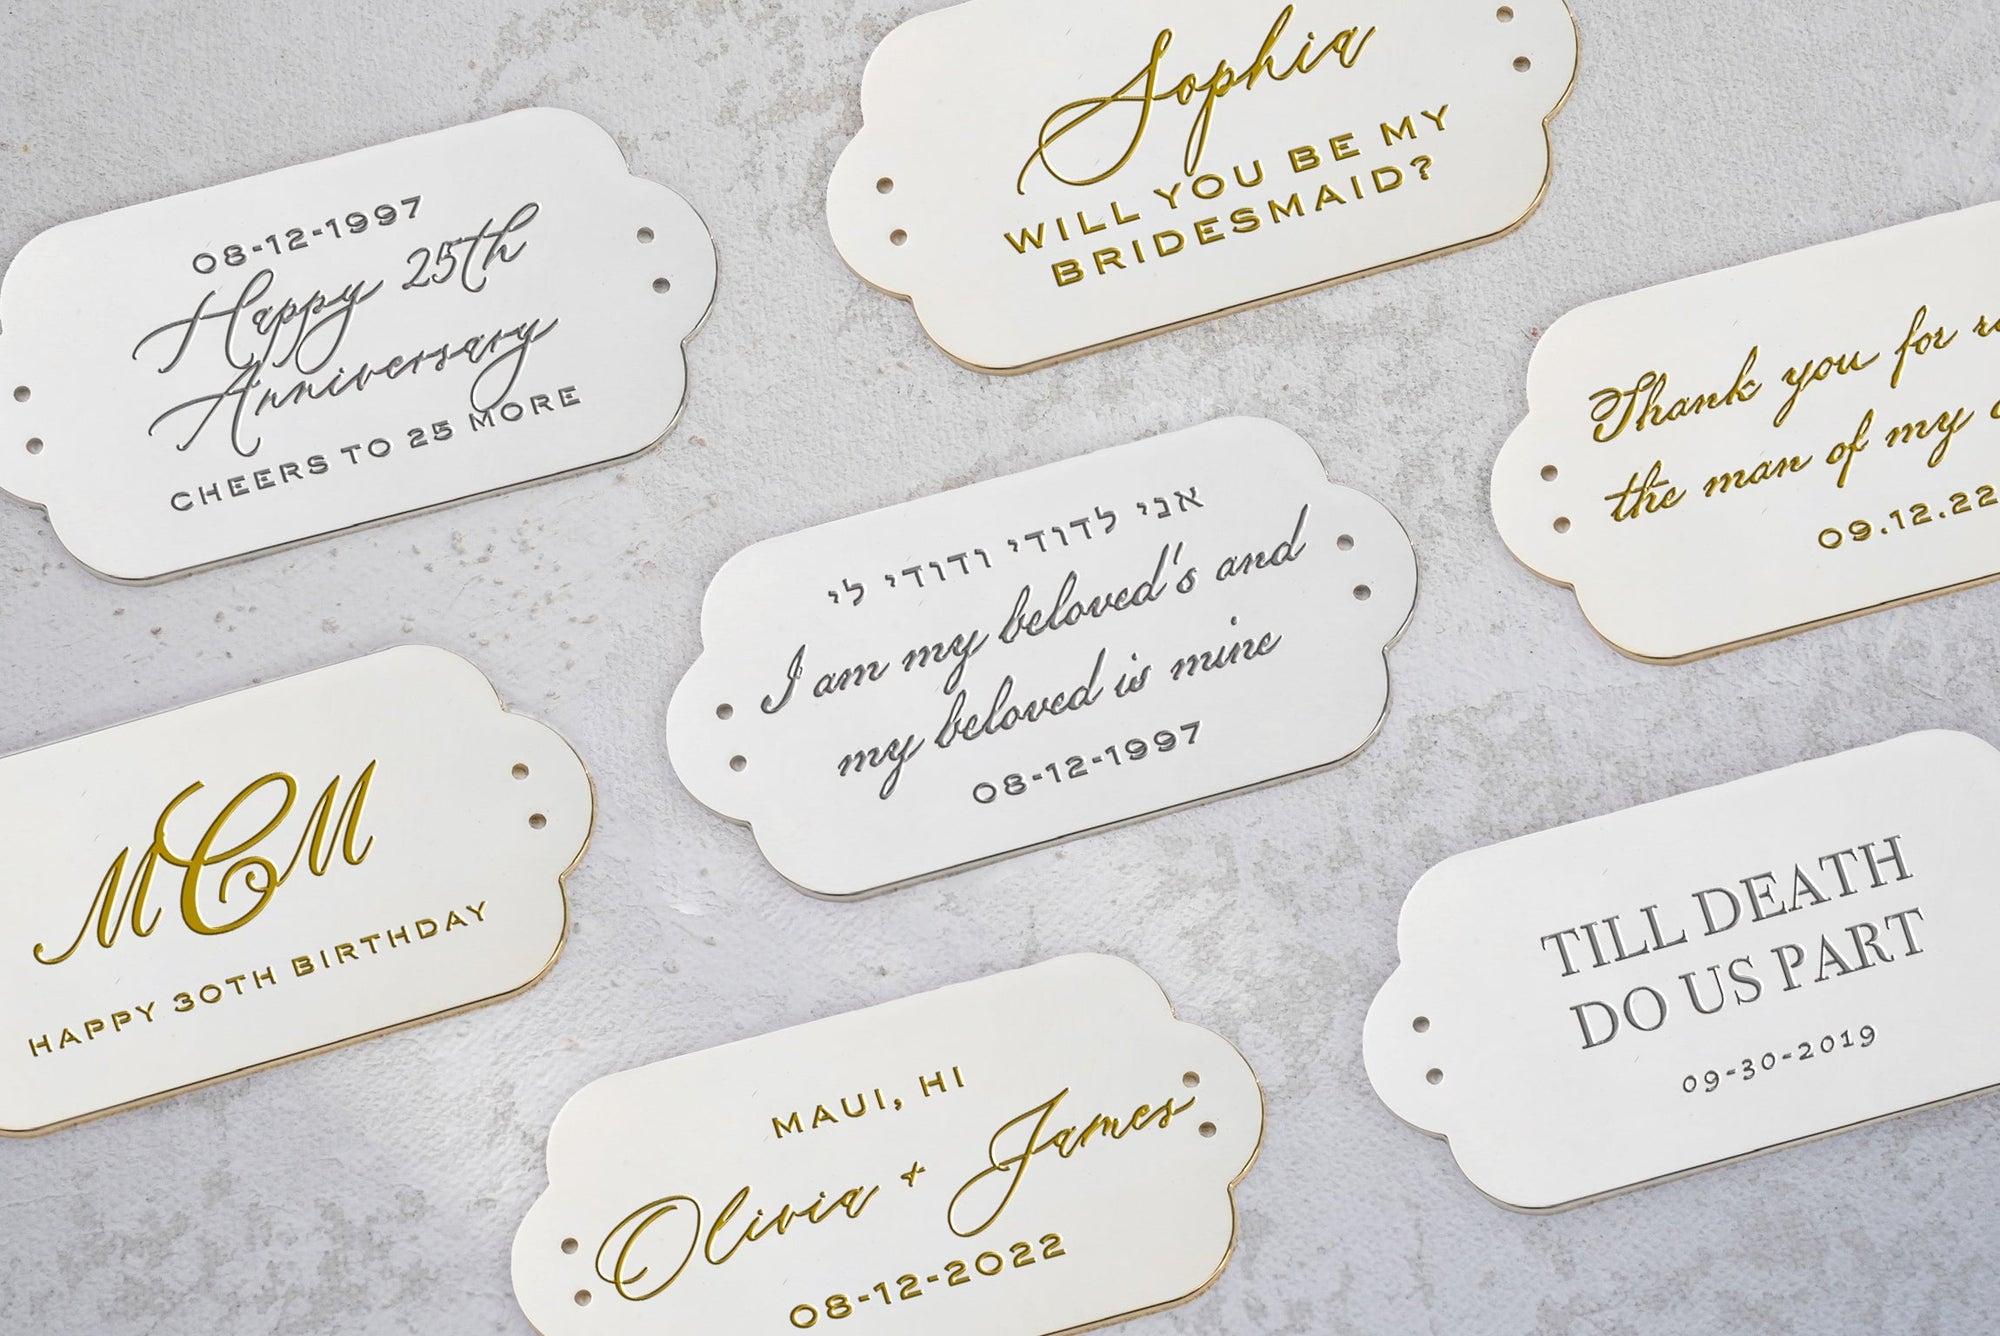 Assorted personalized Bella Clutch Sage Green Satin Petite wedding handbag event cards with gold lettering and edges displayed on a marble surface by The Bella Rosa Collection.